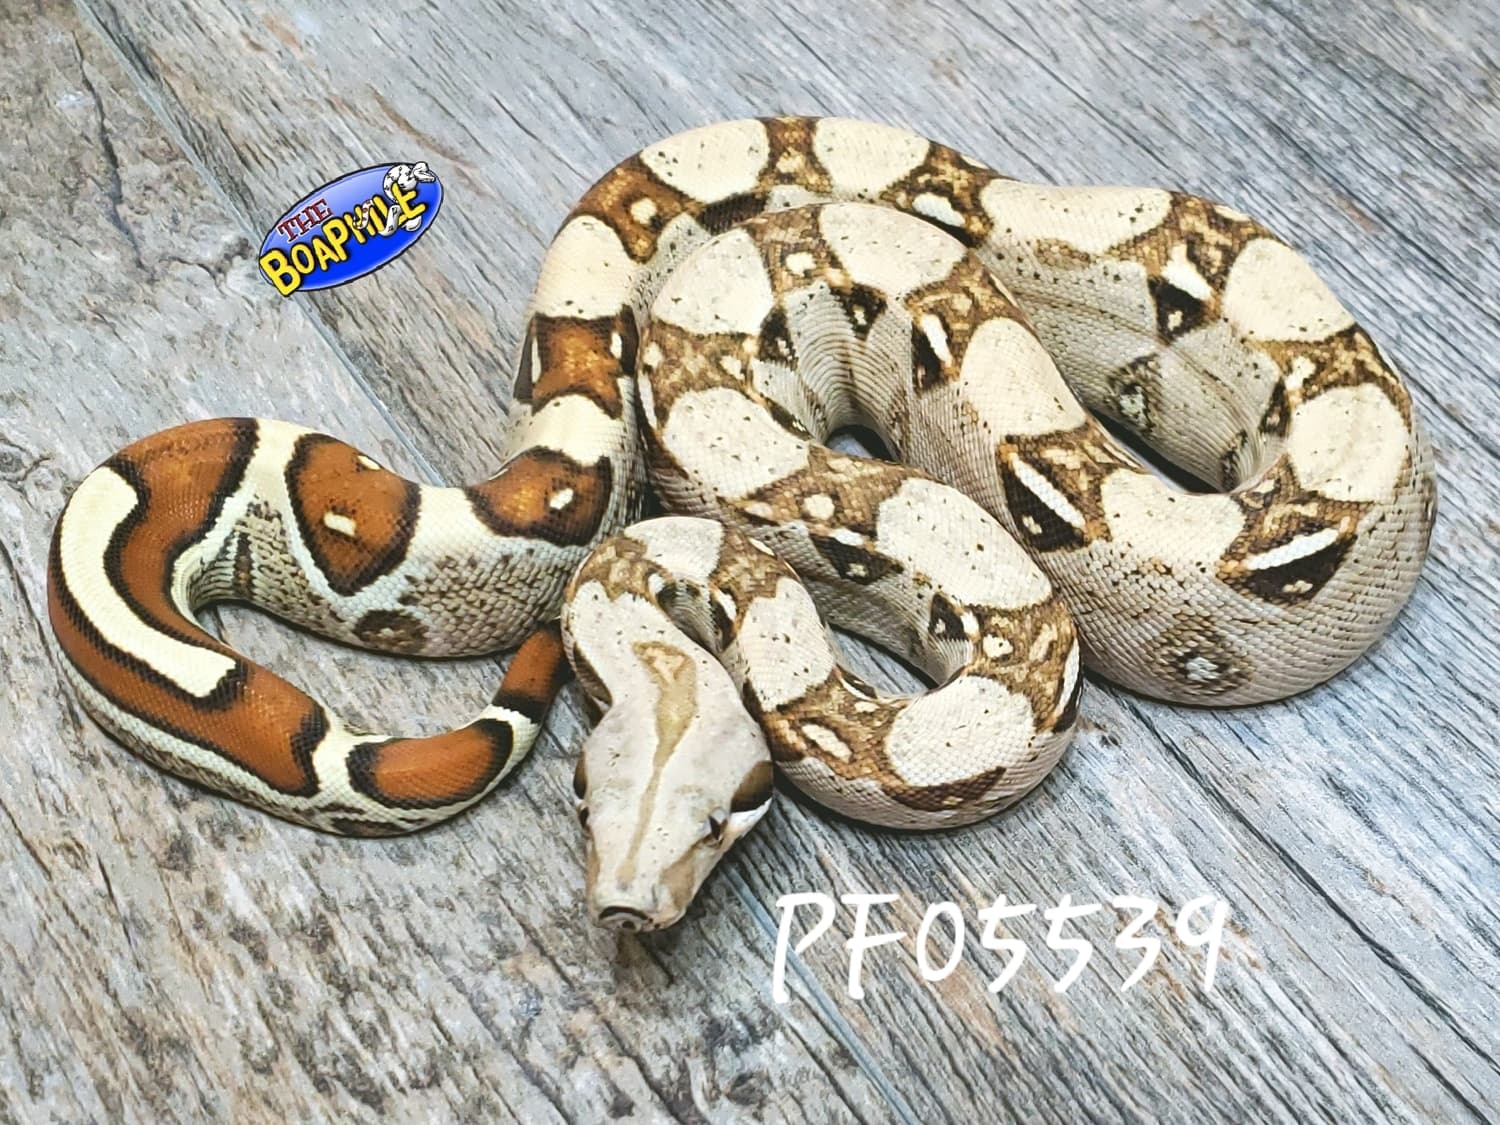 Prodigy Boa Constrictor by Boaphile Jeff Ronne